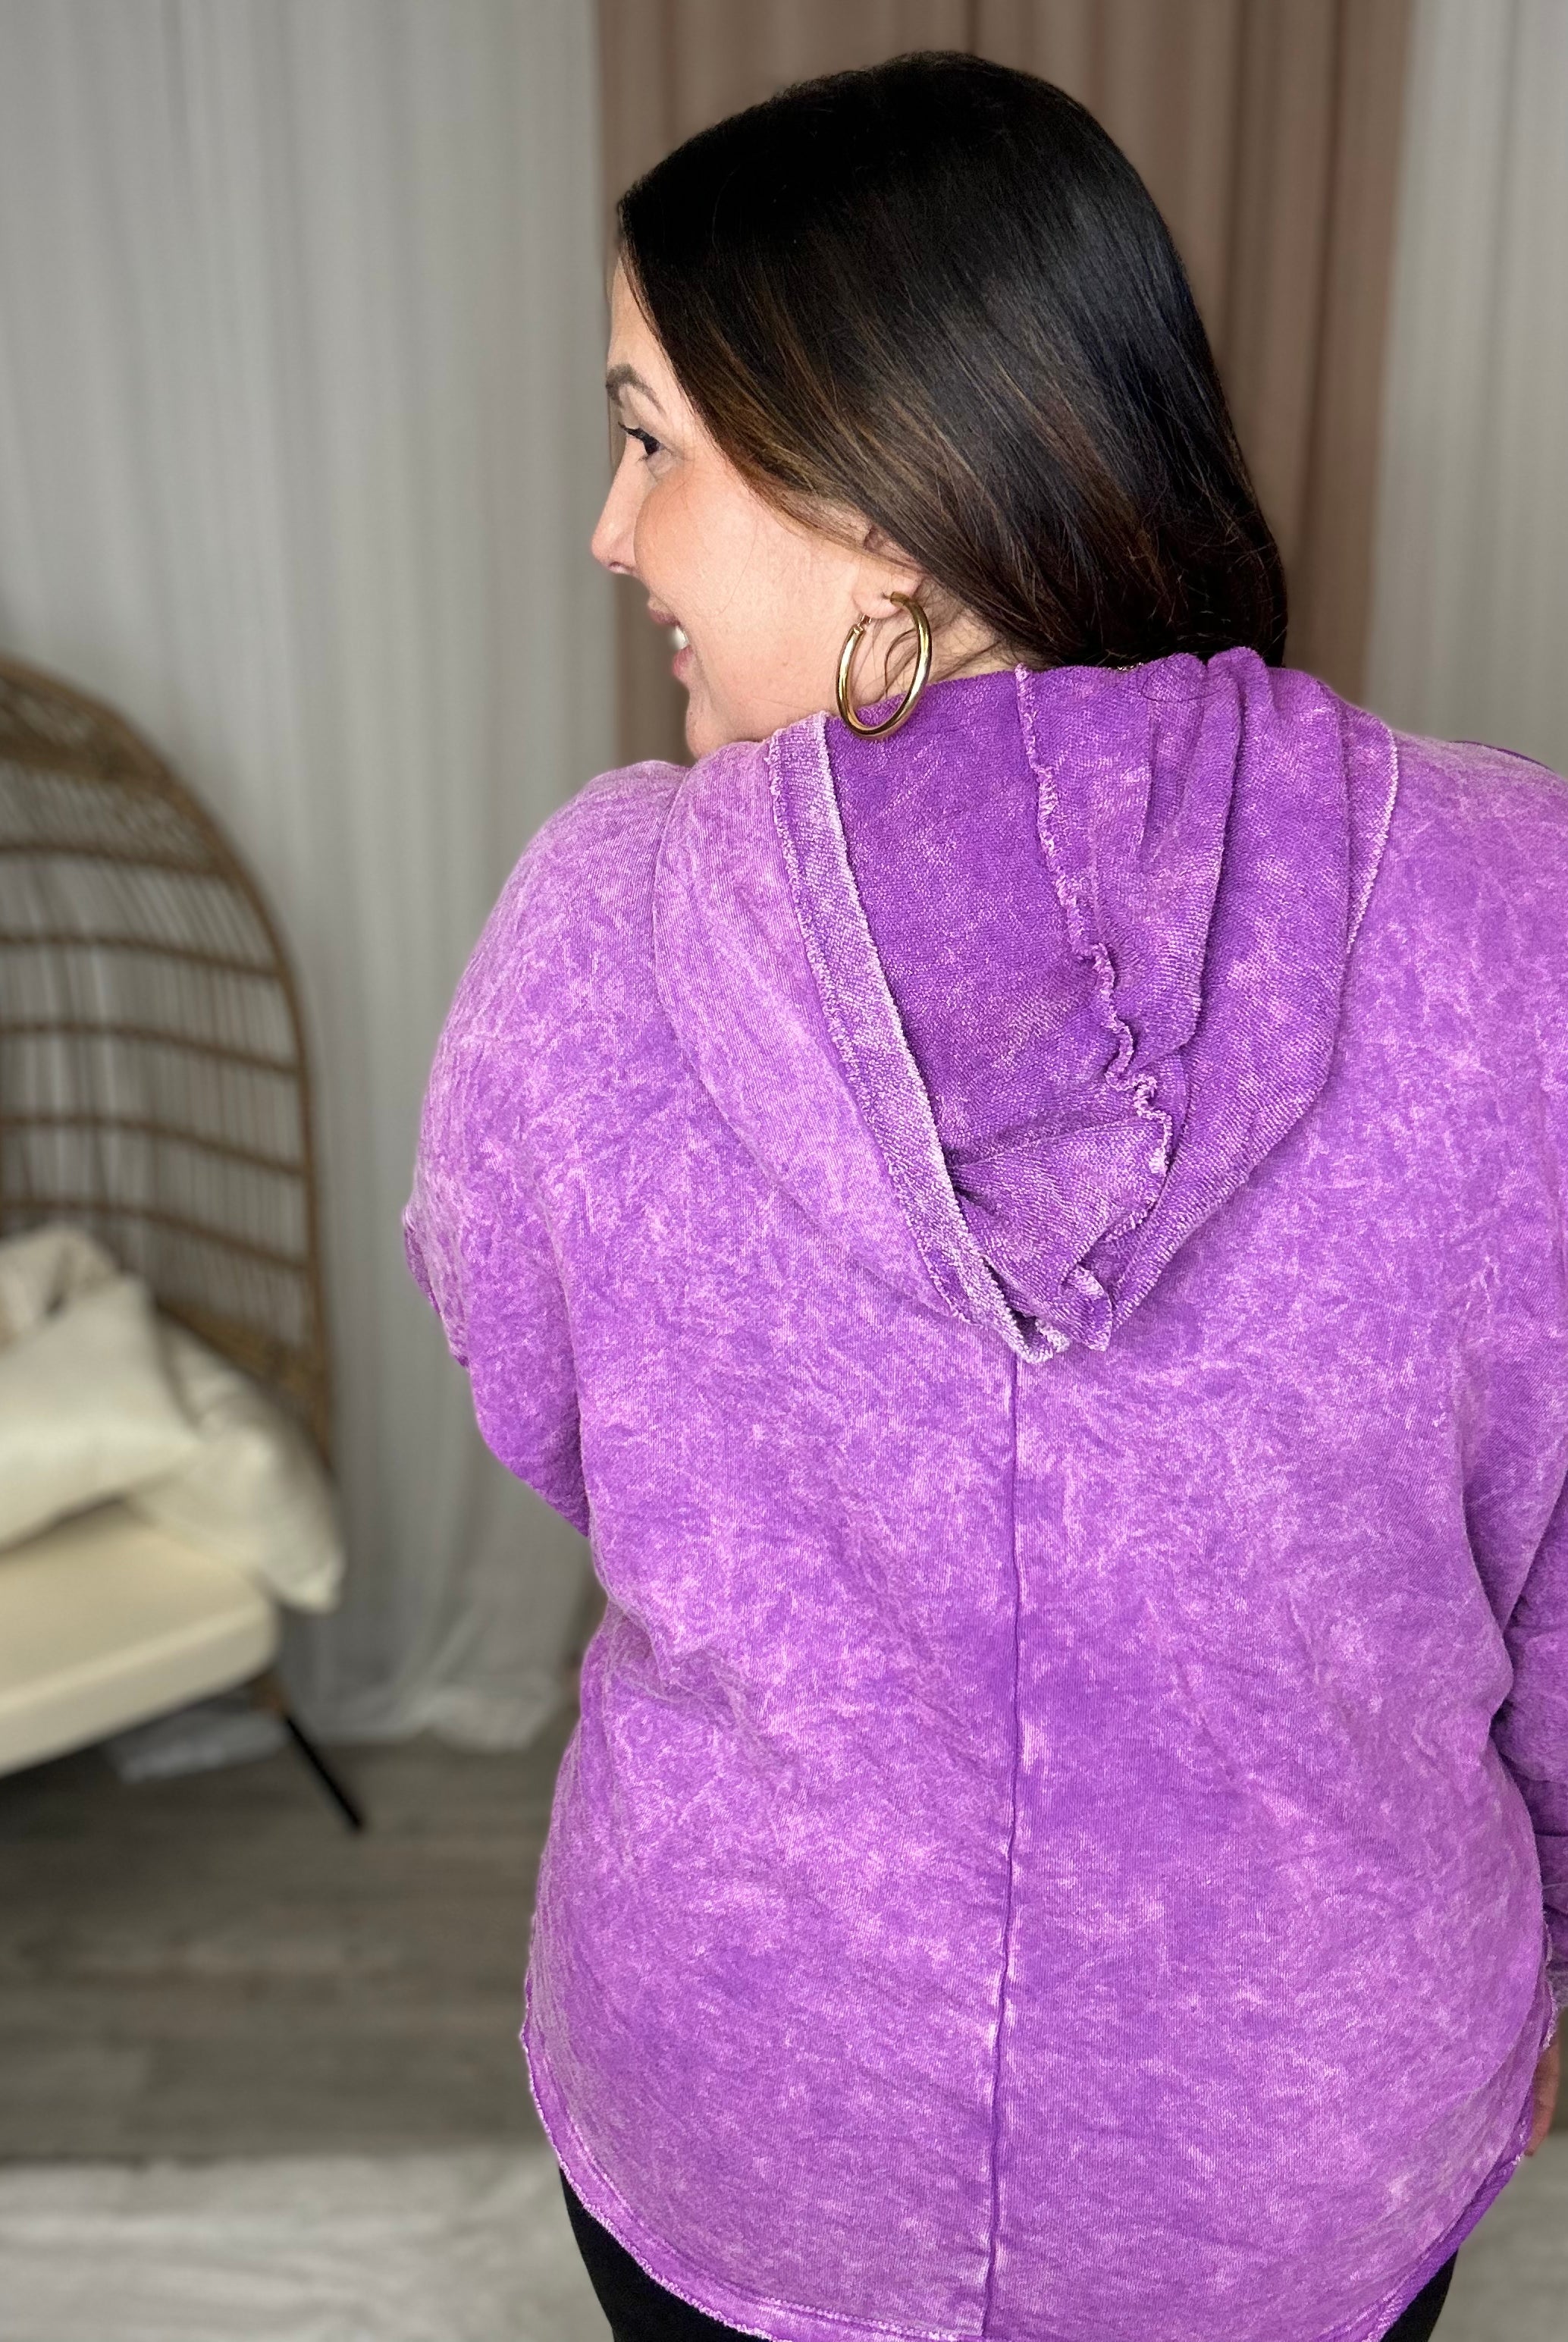 Going into Details Hoodie-210 Hoodies-J. Her-Heathered Boho Boutique, Women's Fashion and Accessories in Palmetto, FL